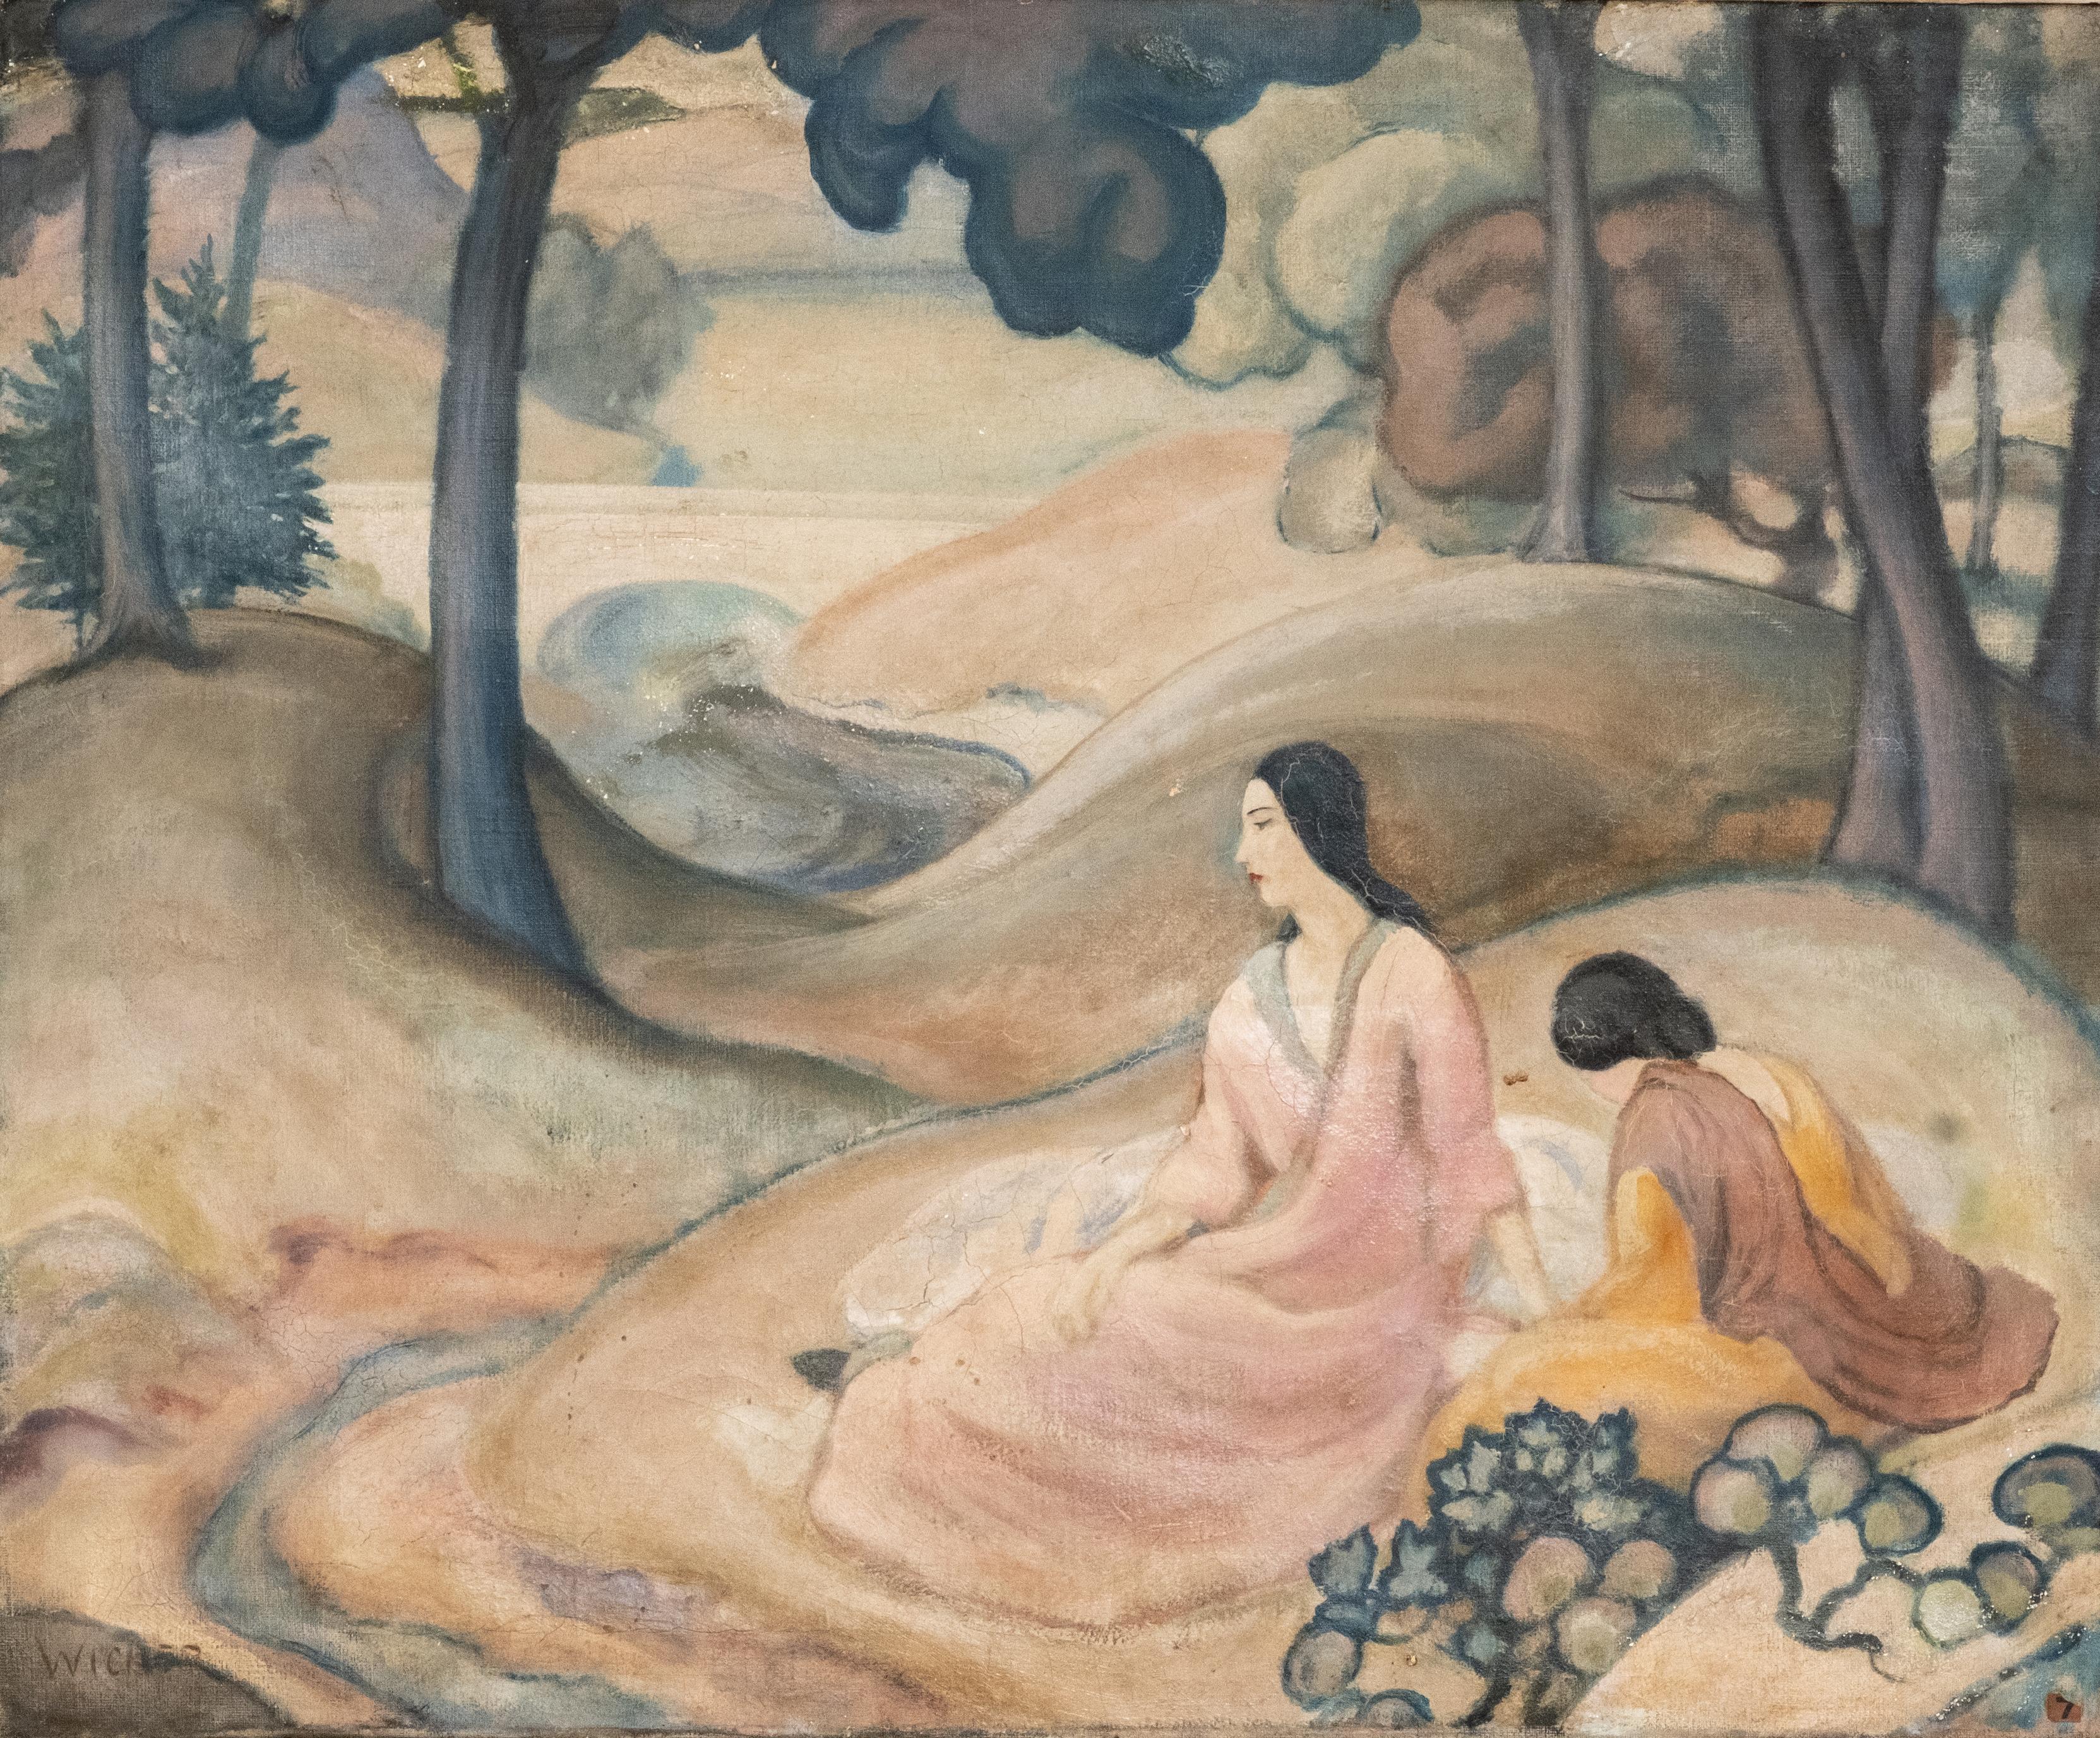 John Palmer Wicker (American, 1860-1931), 'Two Women in a Landscape, #7'. Oil painting on canvas. Art nouveau and impressionist influenced. Depicting two female figures seated near a forest stream. Signed lower left, #7 label lower right.